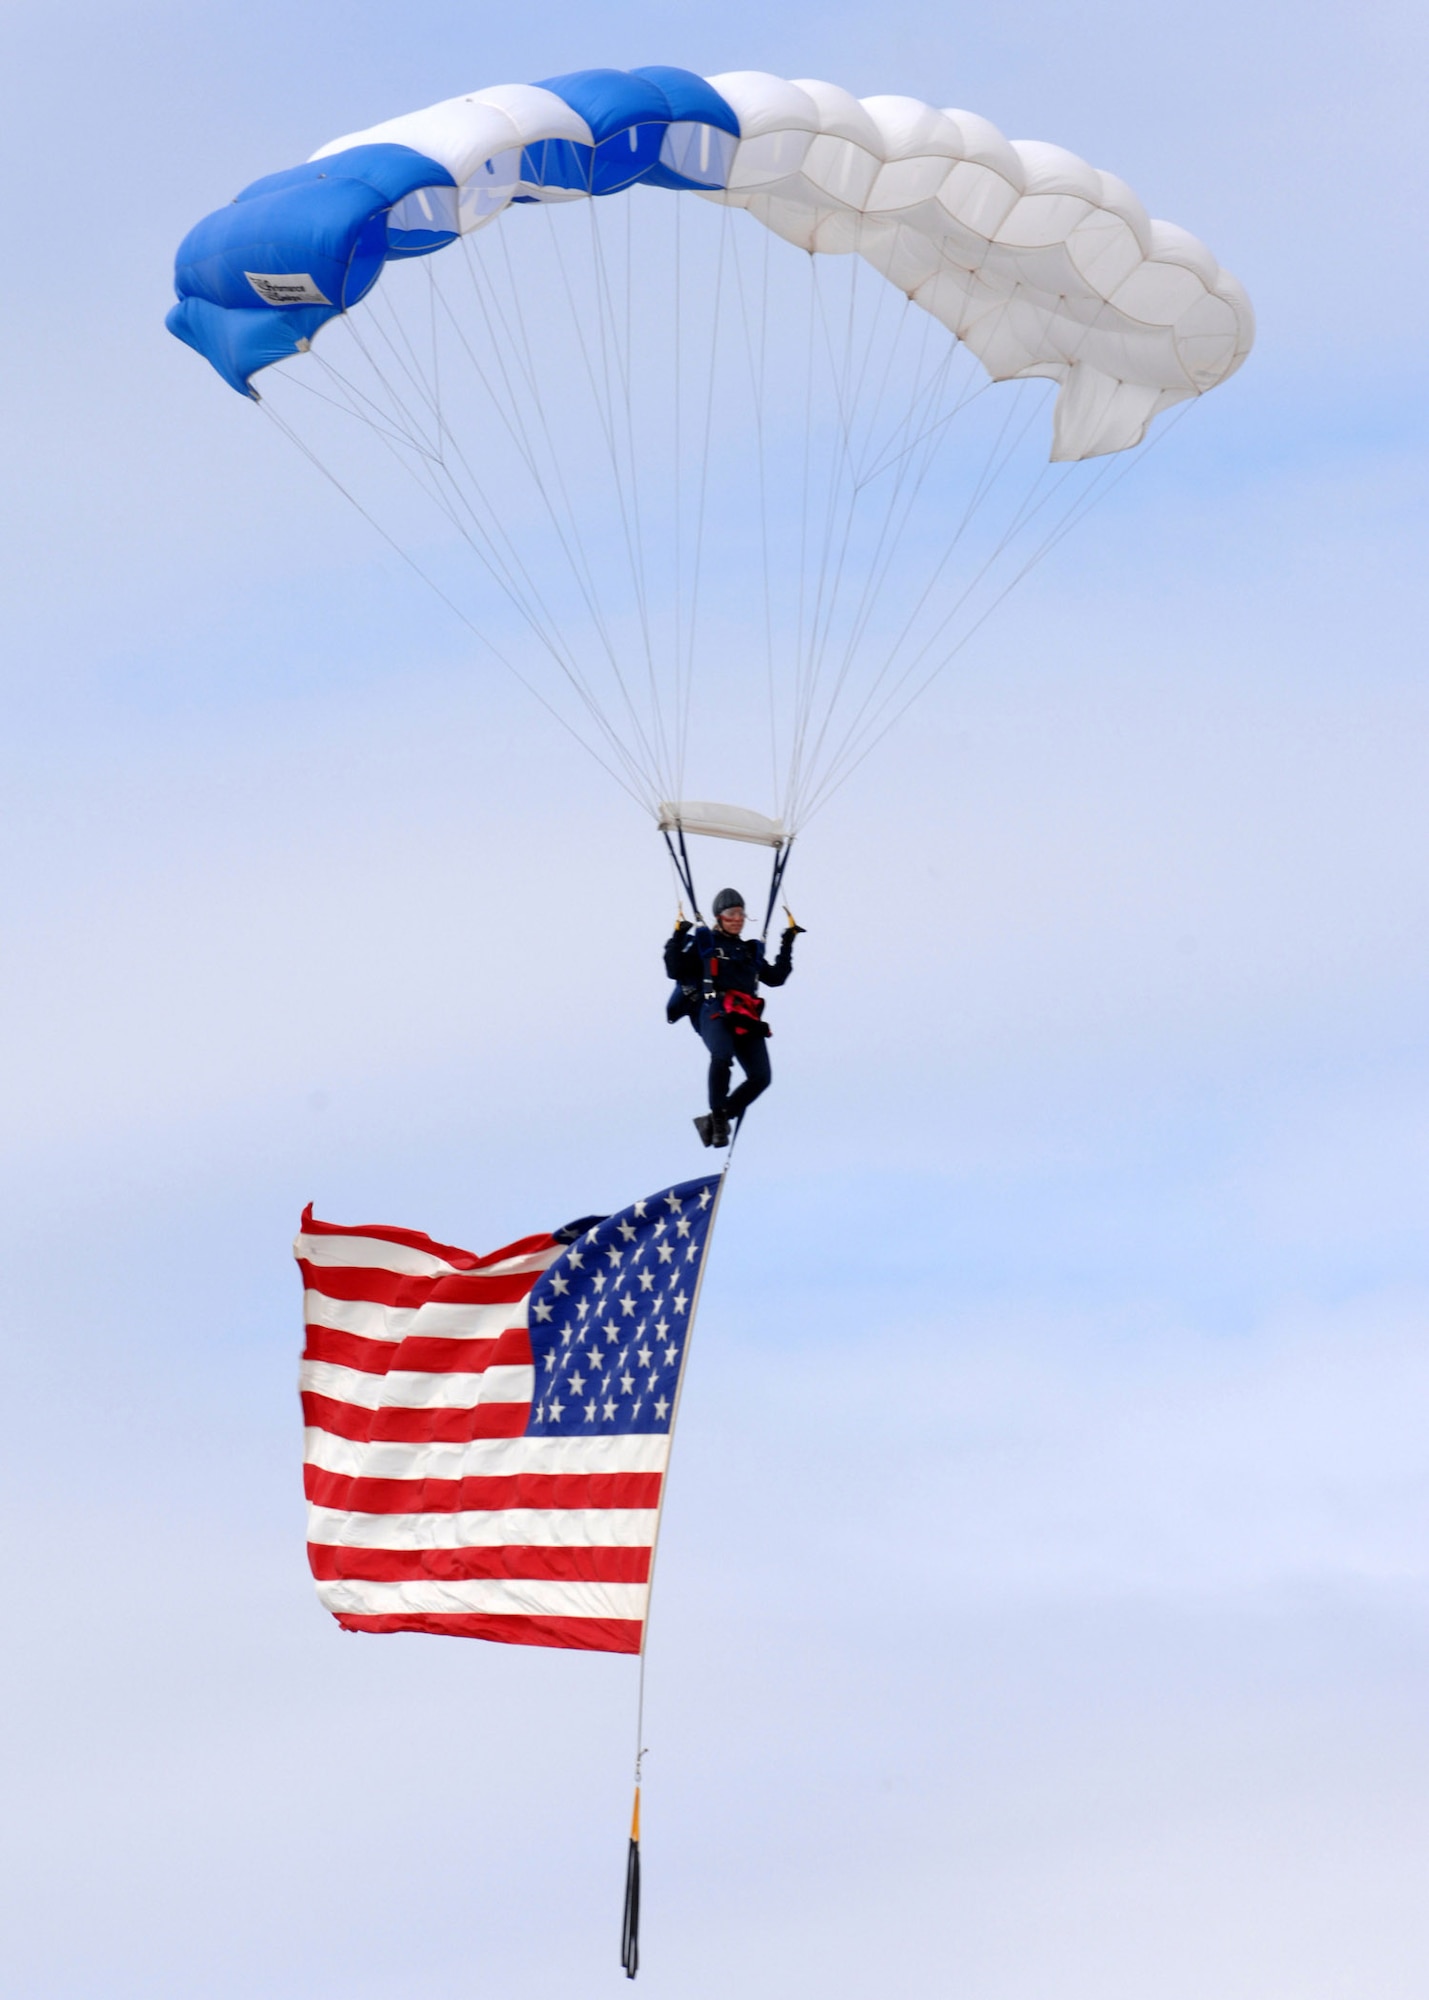 Cadet 1st Class Ilea Eskildsen, U.S. Air Force Academy's Wings of Blue Parachute Demonstration Team, parachutes down to Luke Air Force Base, Ariz., with the American Flag during the "The Show of Force 2007, From Heritage to Horizons Air Show" March 24. The two-day air show attracted thousands of spectators, featured Air Force static displays, and included civilian and military arial demonstrations.  The show was part of Air Force Week, a week-long event designed to highlight the amazing things the Air Force is doing around the globe and to show appreciation to the local community for its support. (U.S. Air Force photo/Staff Sgt. Brian Ferguson)